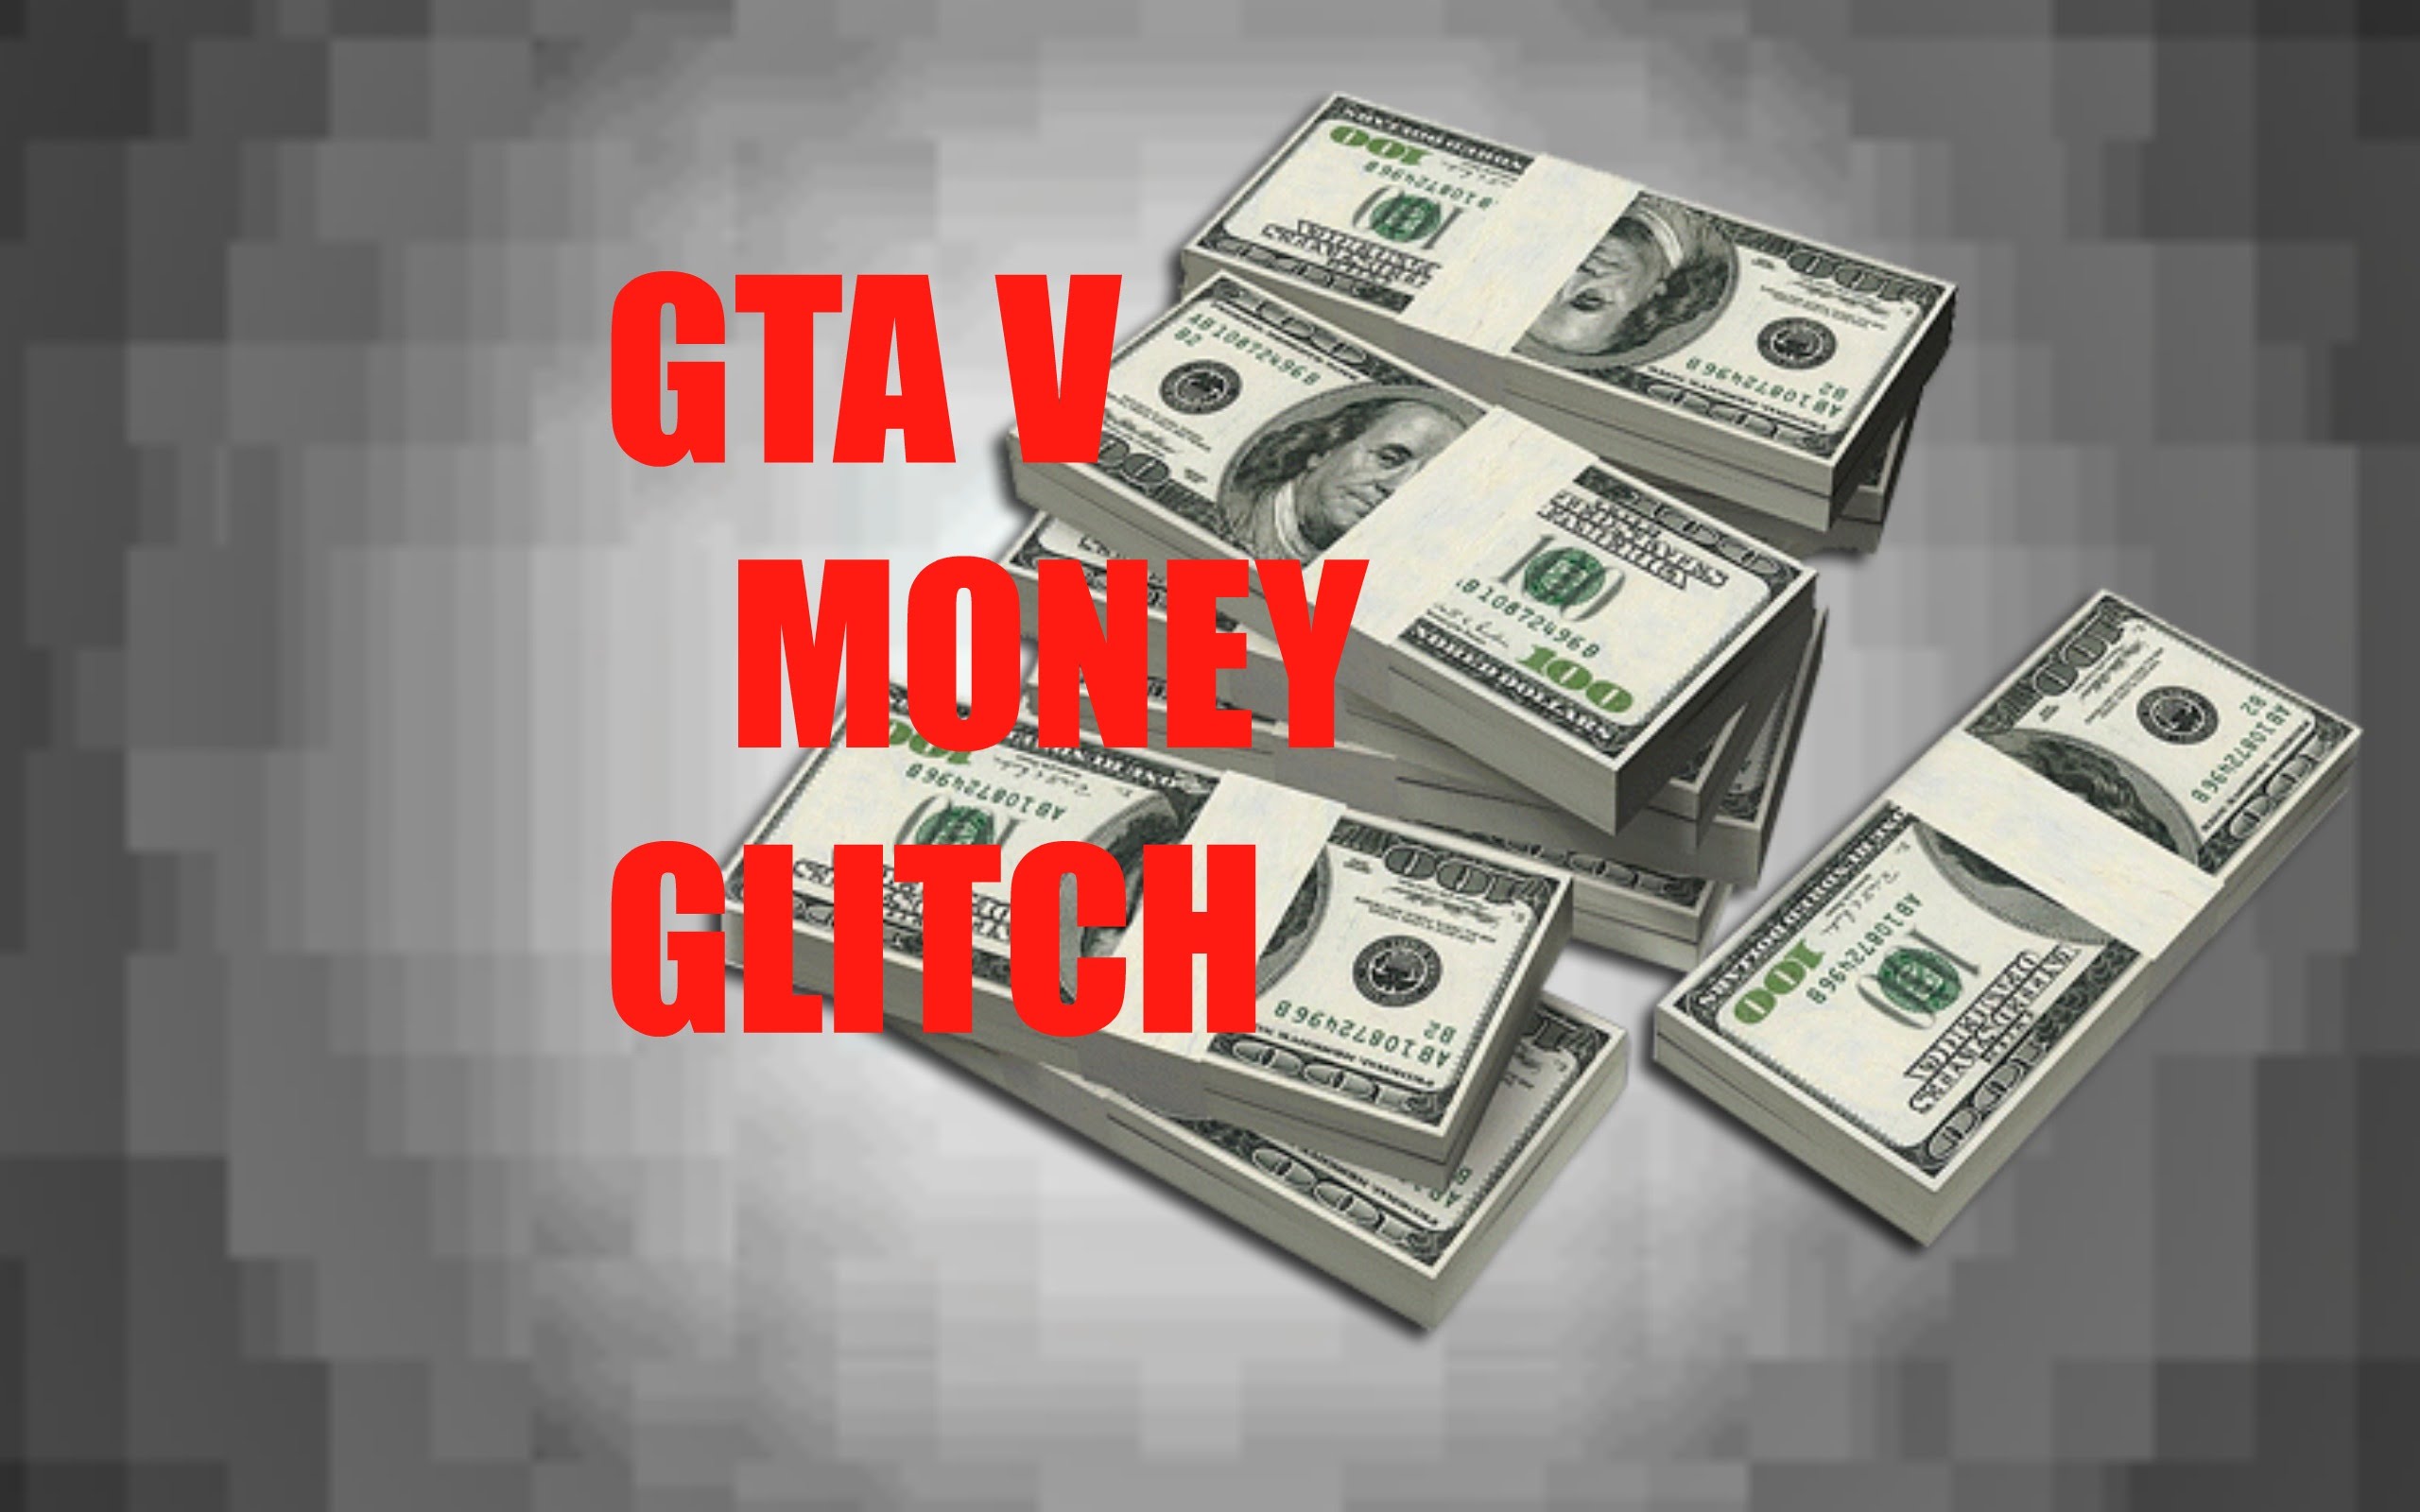 Gta V Money Cheat – Is There Anything That?